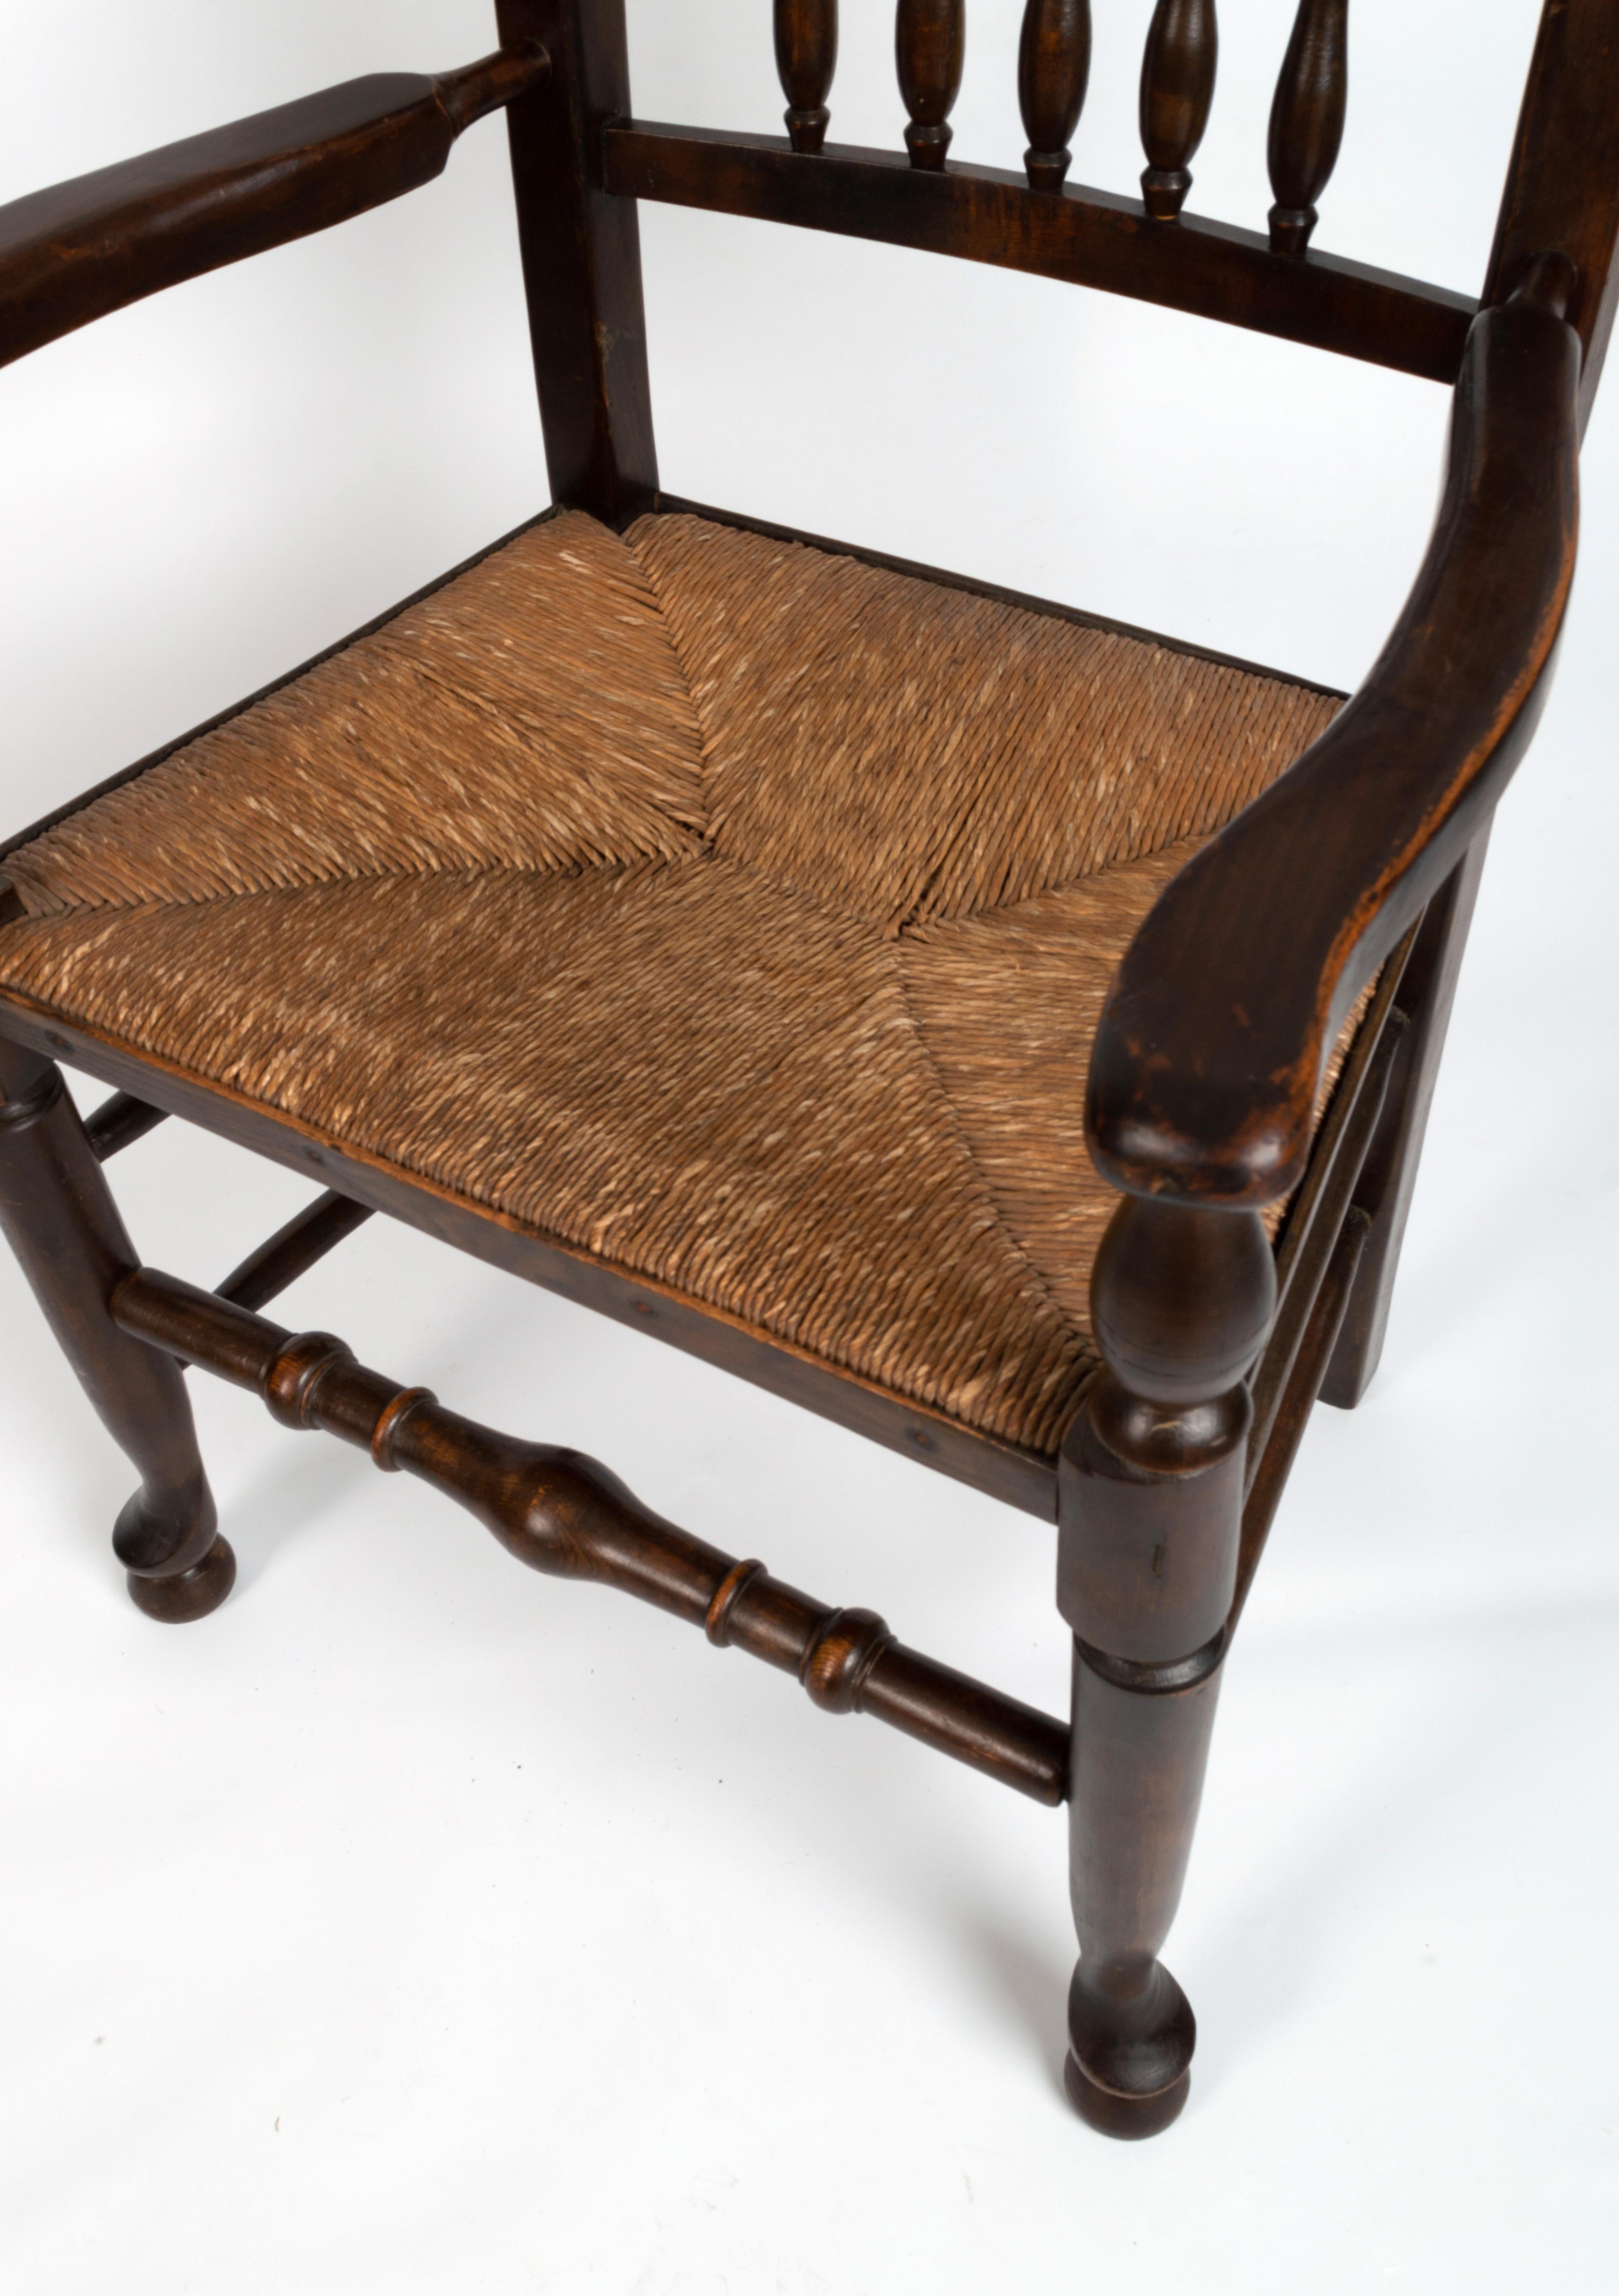 Country Antique English Arts & Crafts Oak Rush Elbow Chair C.1840 For Sale